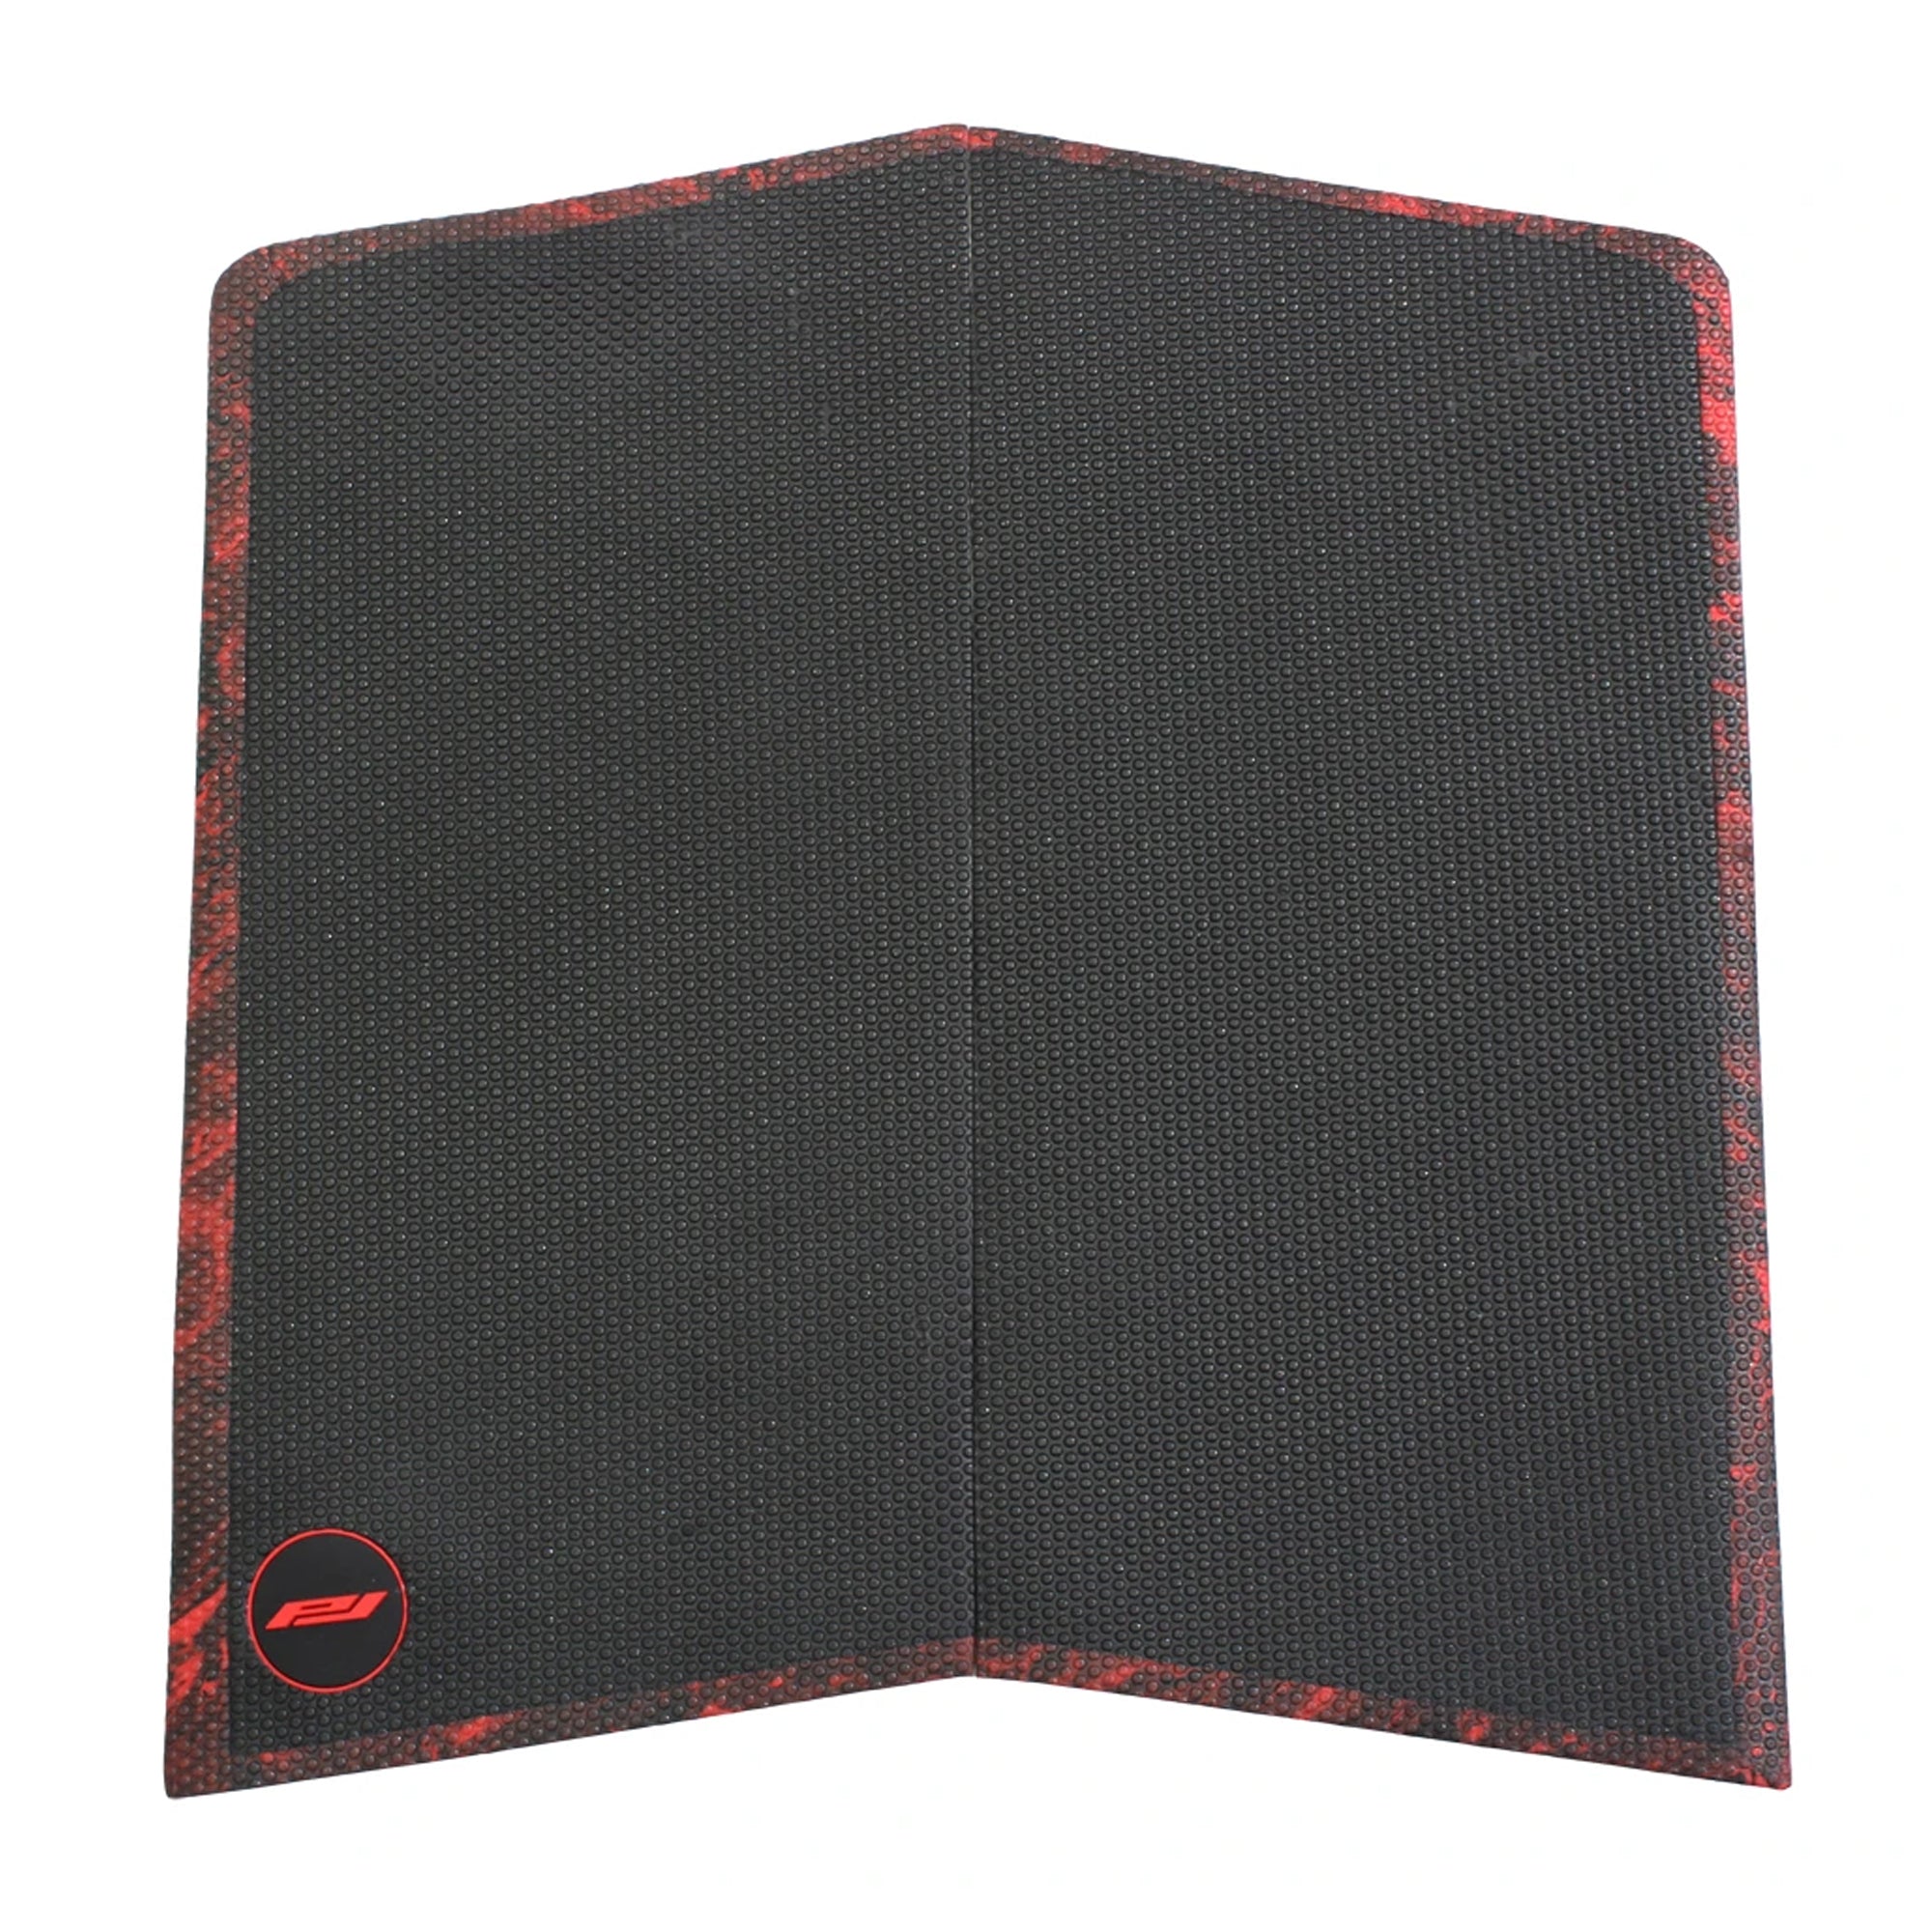 Pro-Lite Eithan Osborne X STAB Front Foot Traction Pad